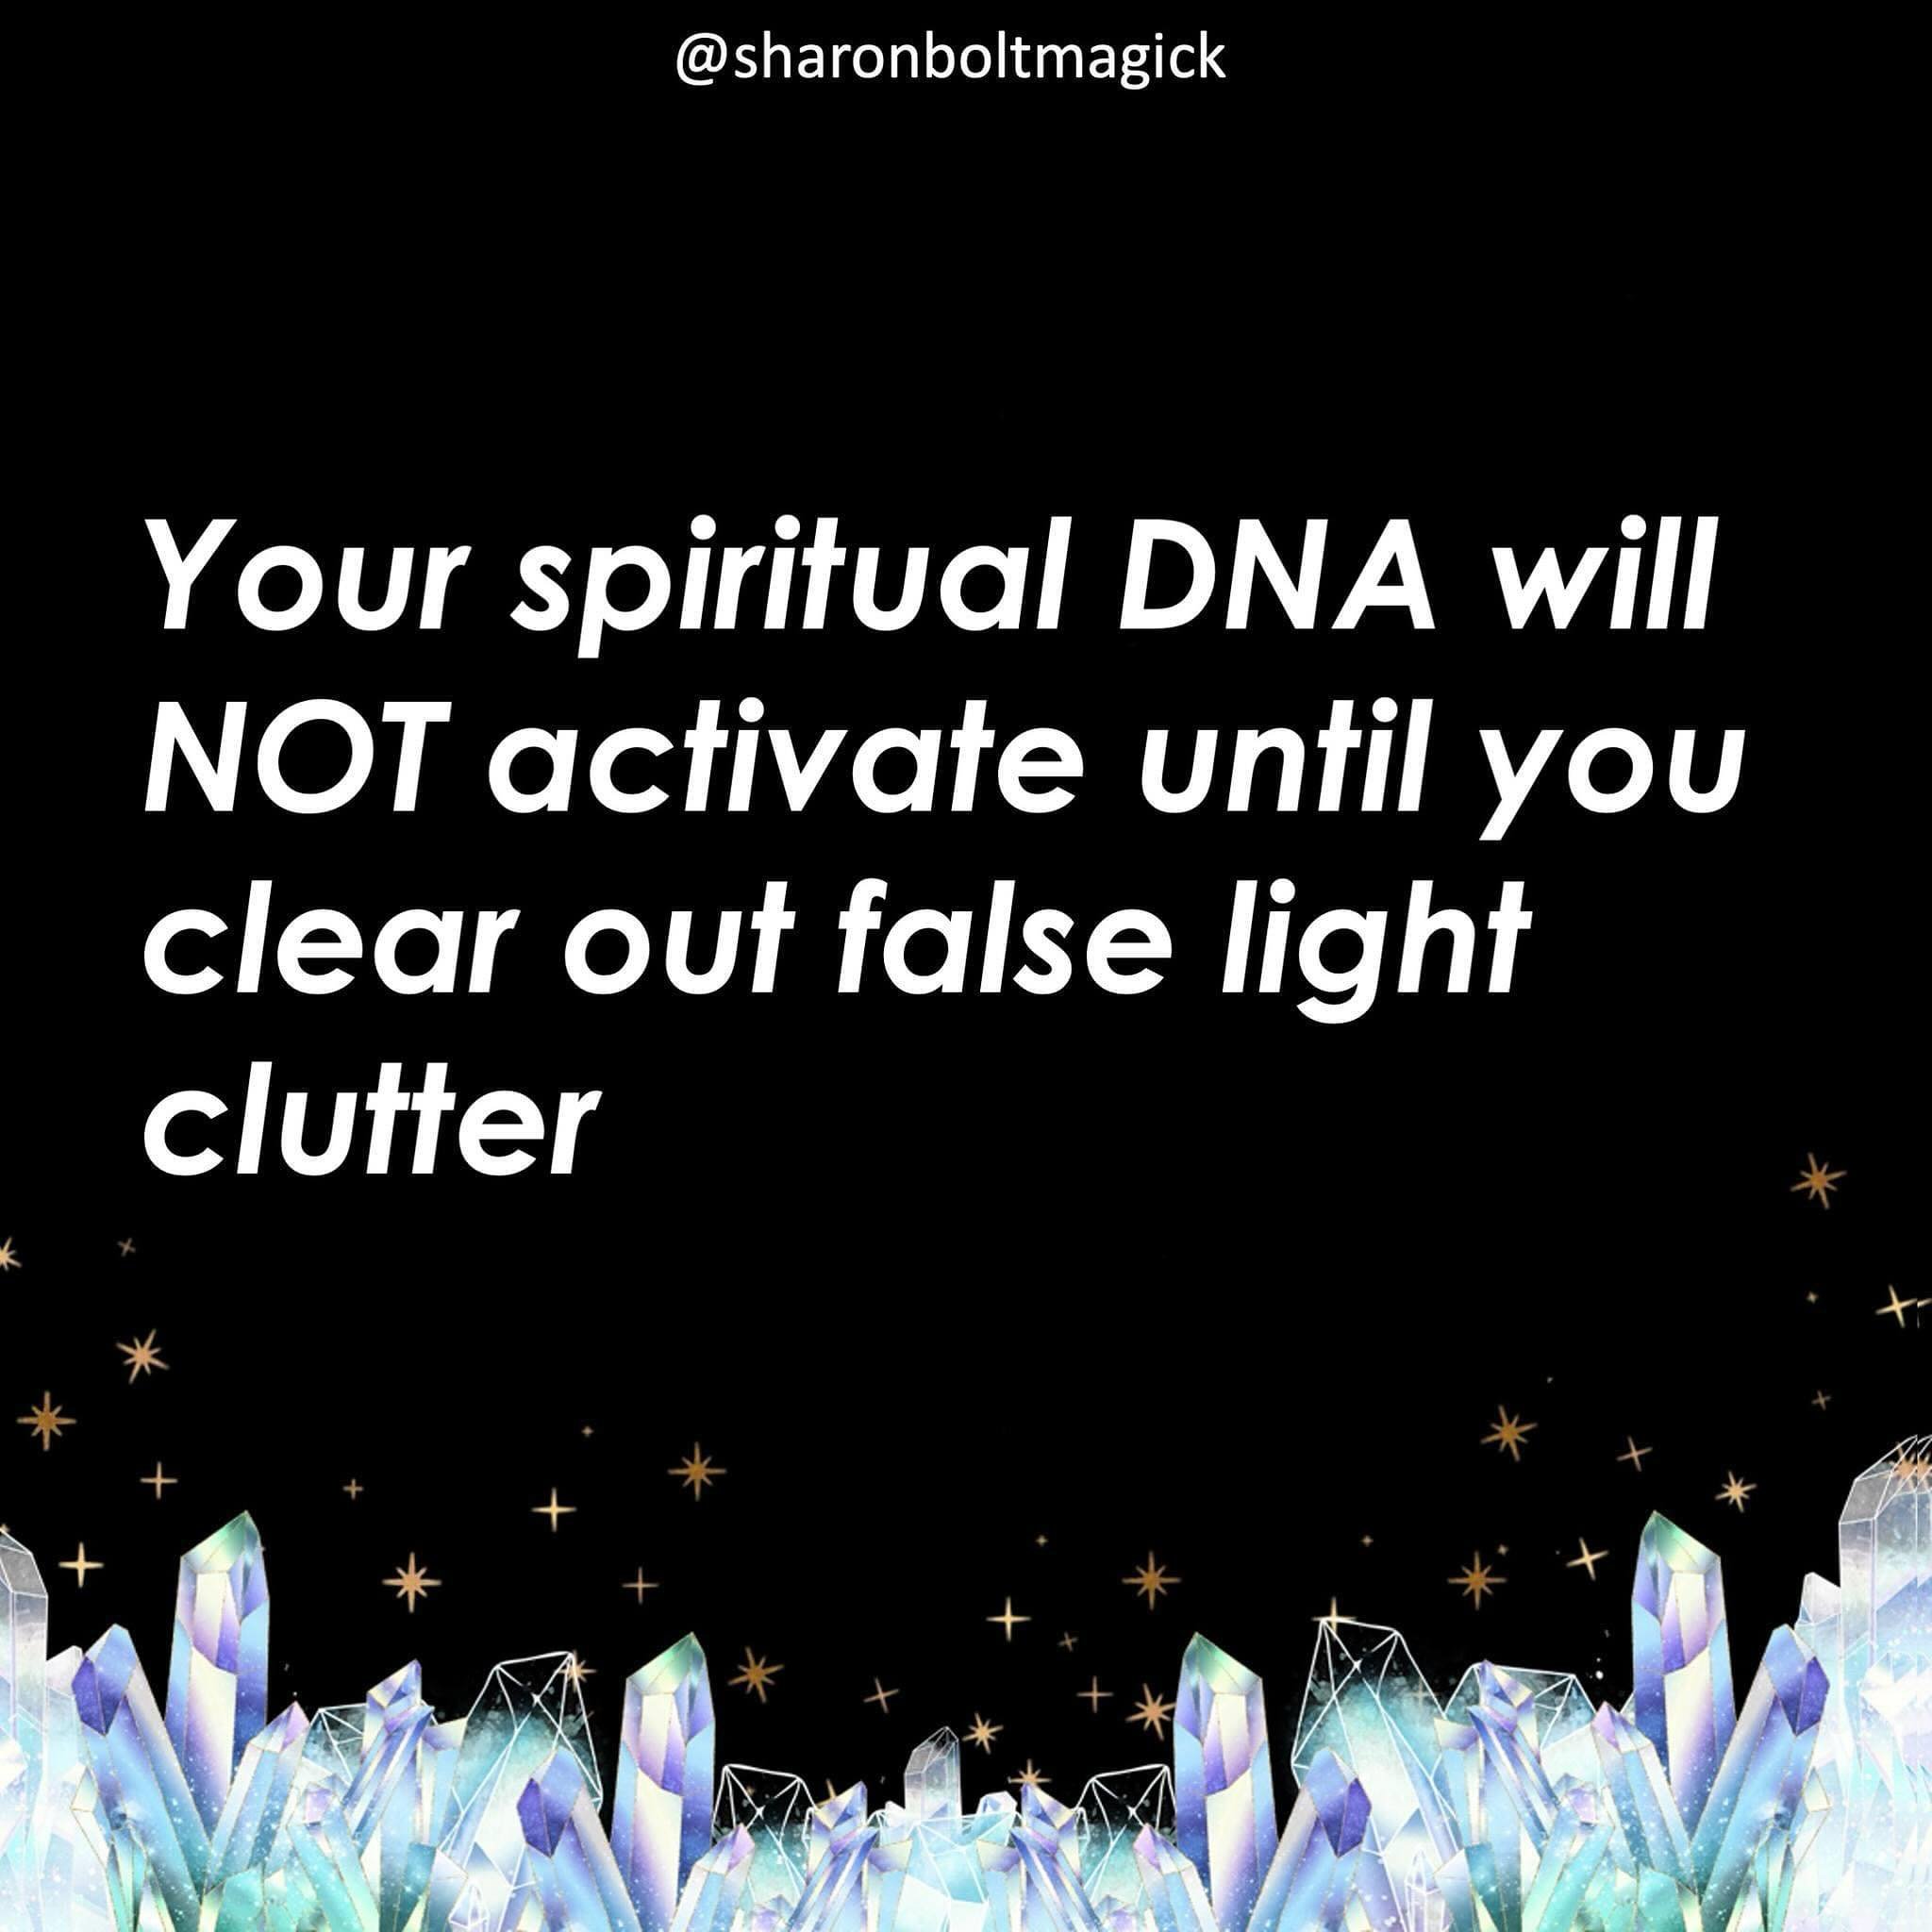 Clearing out false light from our energy bodies and belief systems is an ongoing process, especially in this inverted matrix of endless magnetic shiny things full of false promises designed to get you off path.

Finding the false light imprints, prog